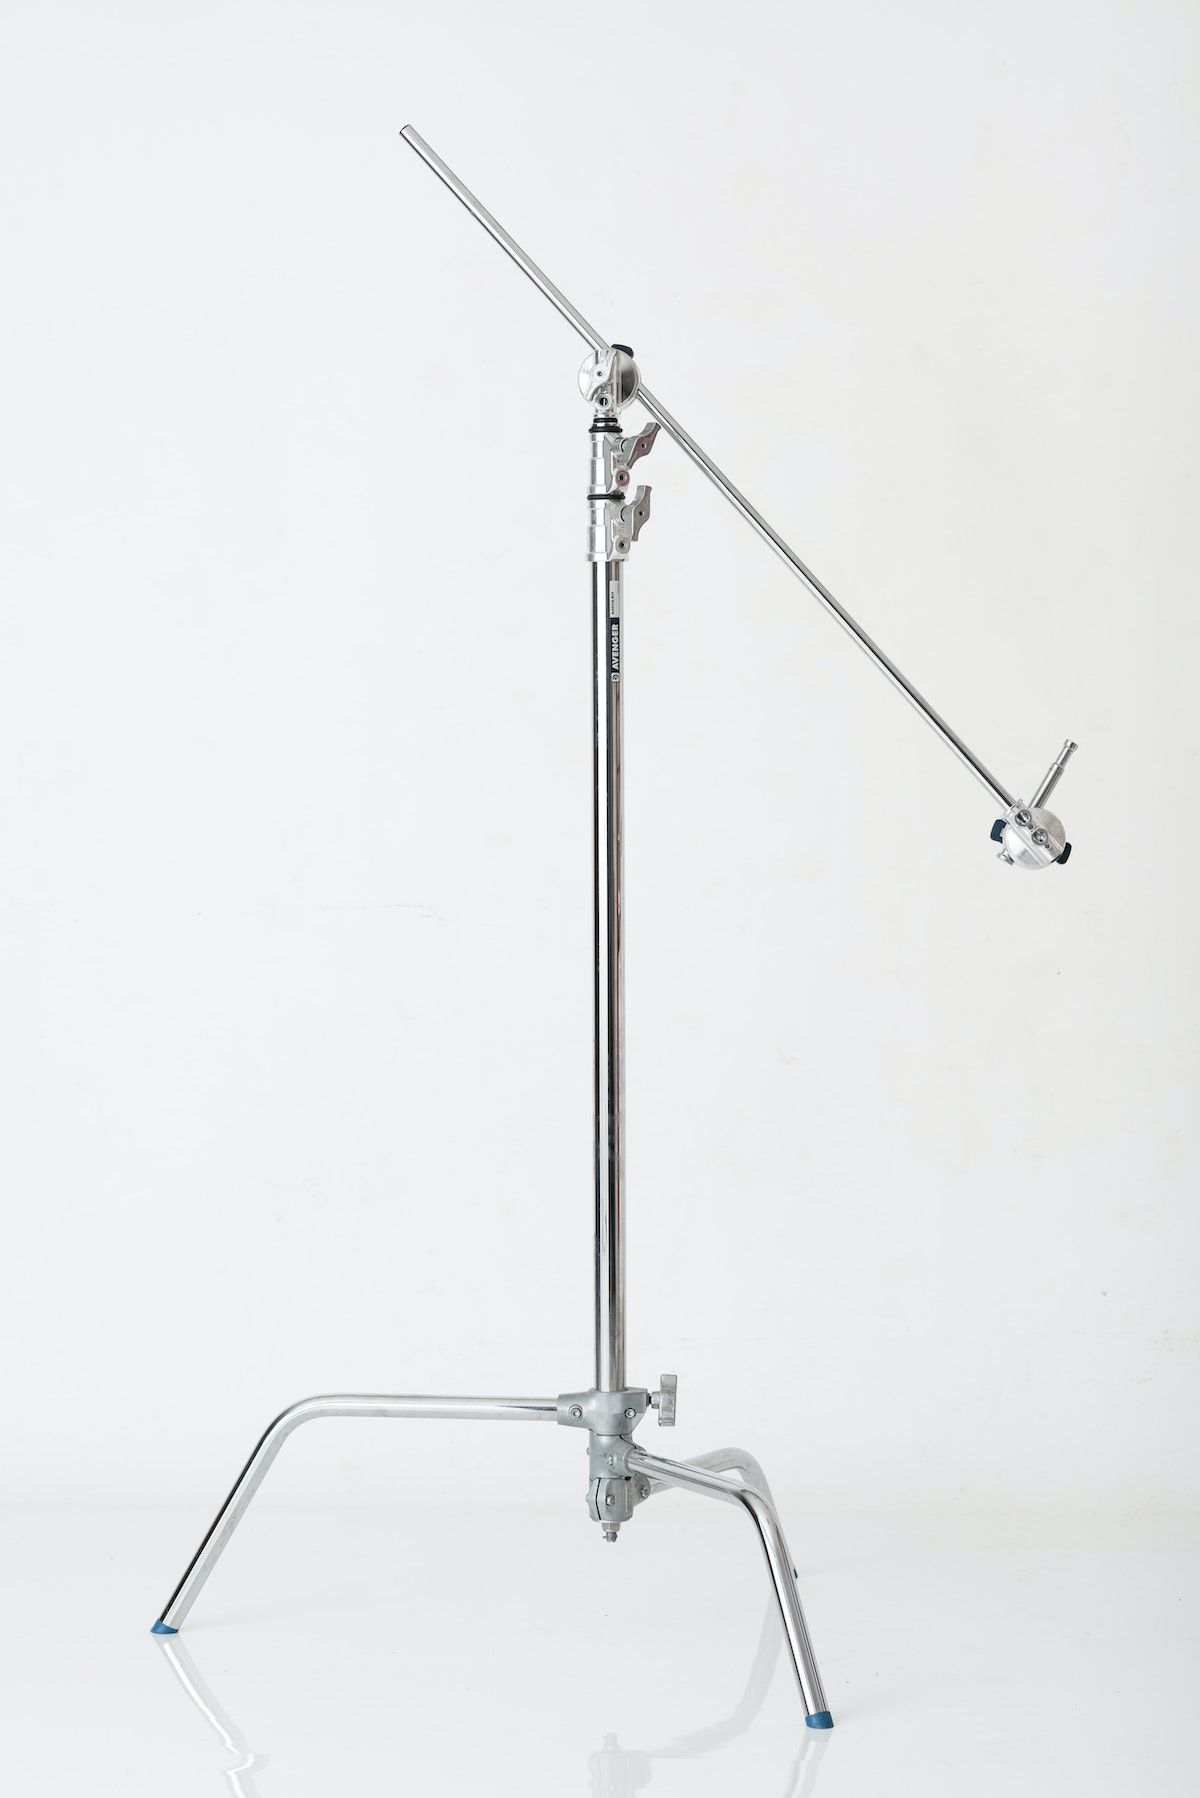 K&M microphone stand with telescopic boom arm